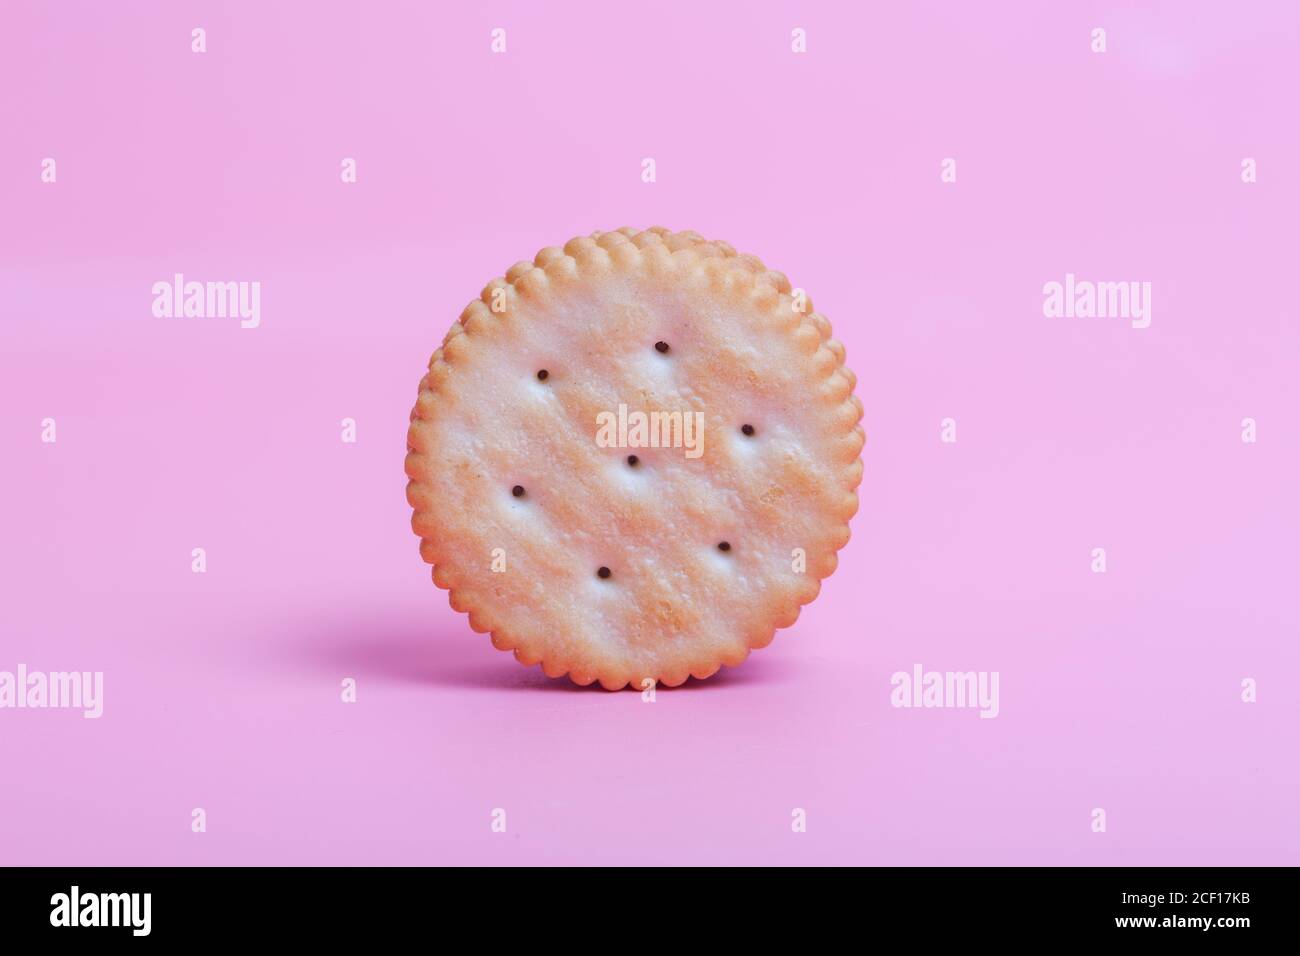 Cream sandwich biscuits on pink background Stock Photo